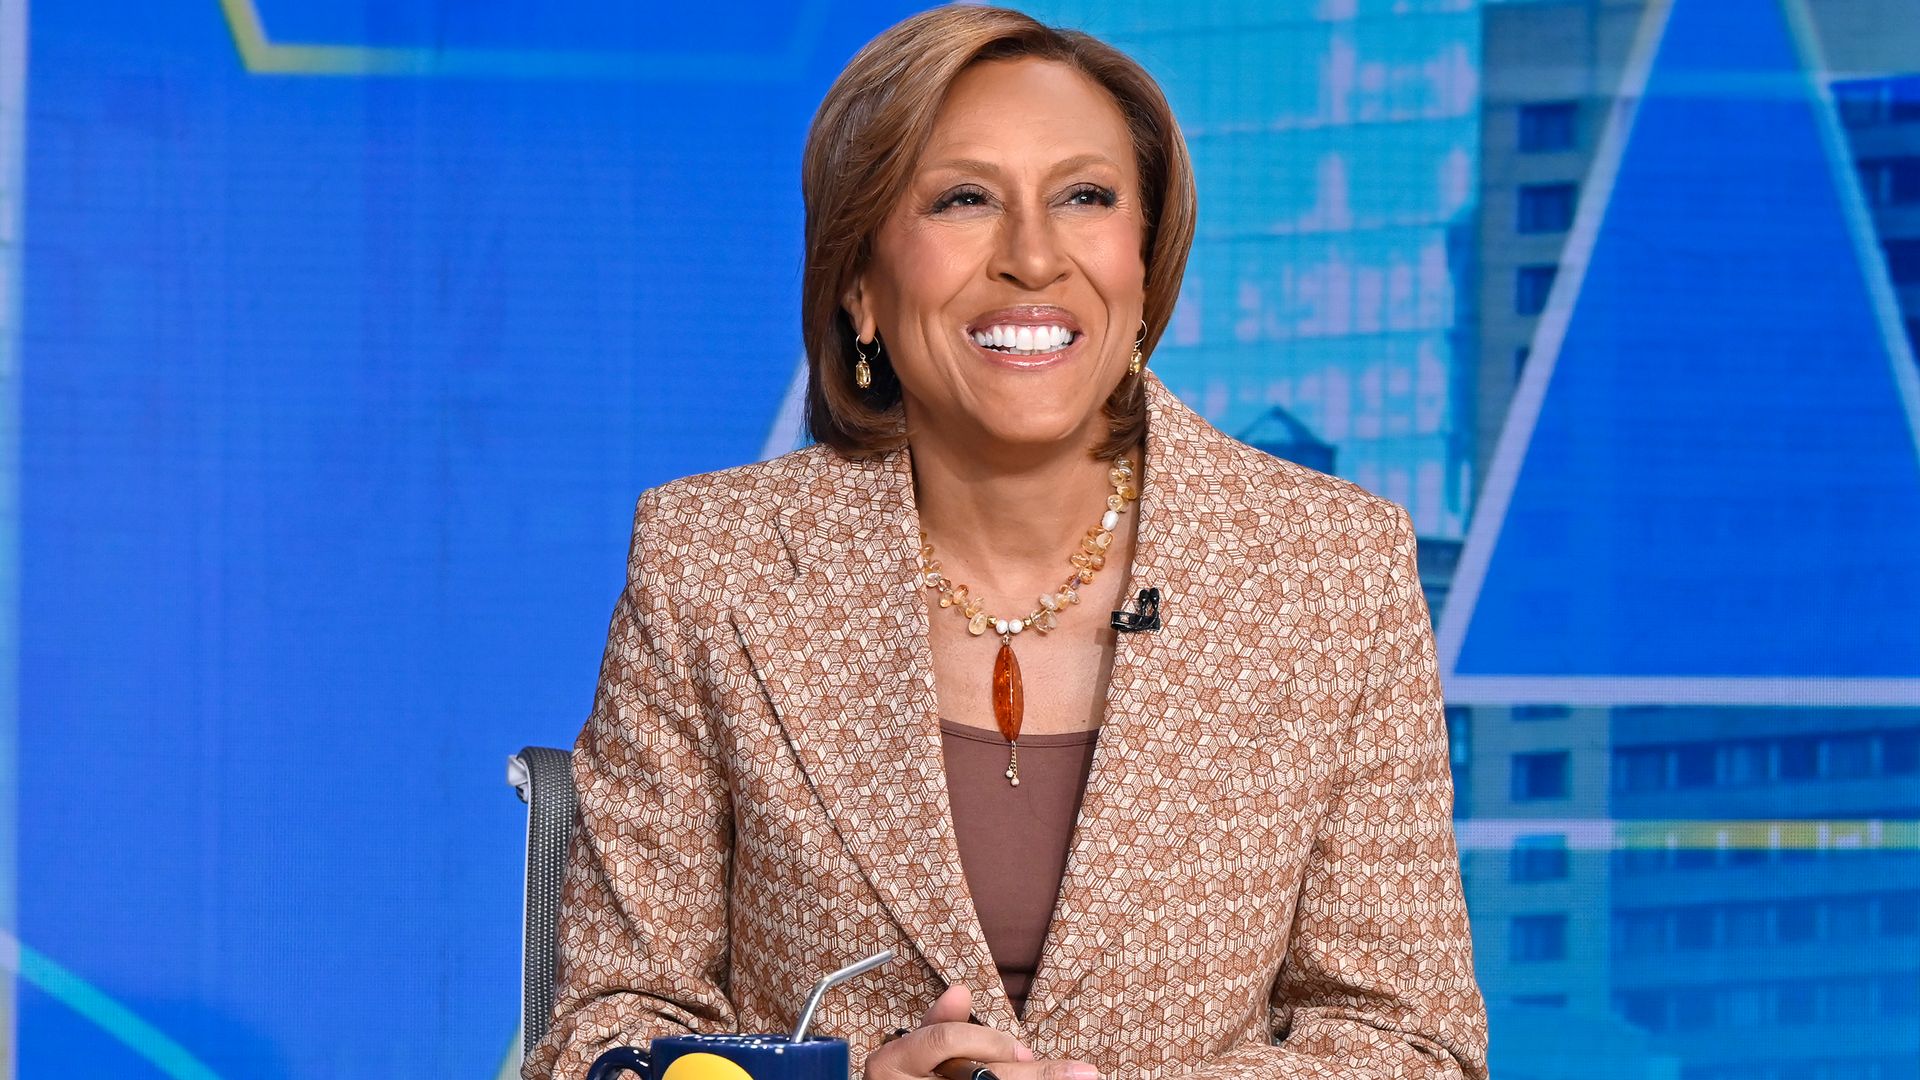 Gma S Robin Roberts Details Unexpected Discovery While Honeymooning With Wife Amber As Fans